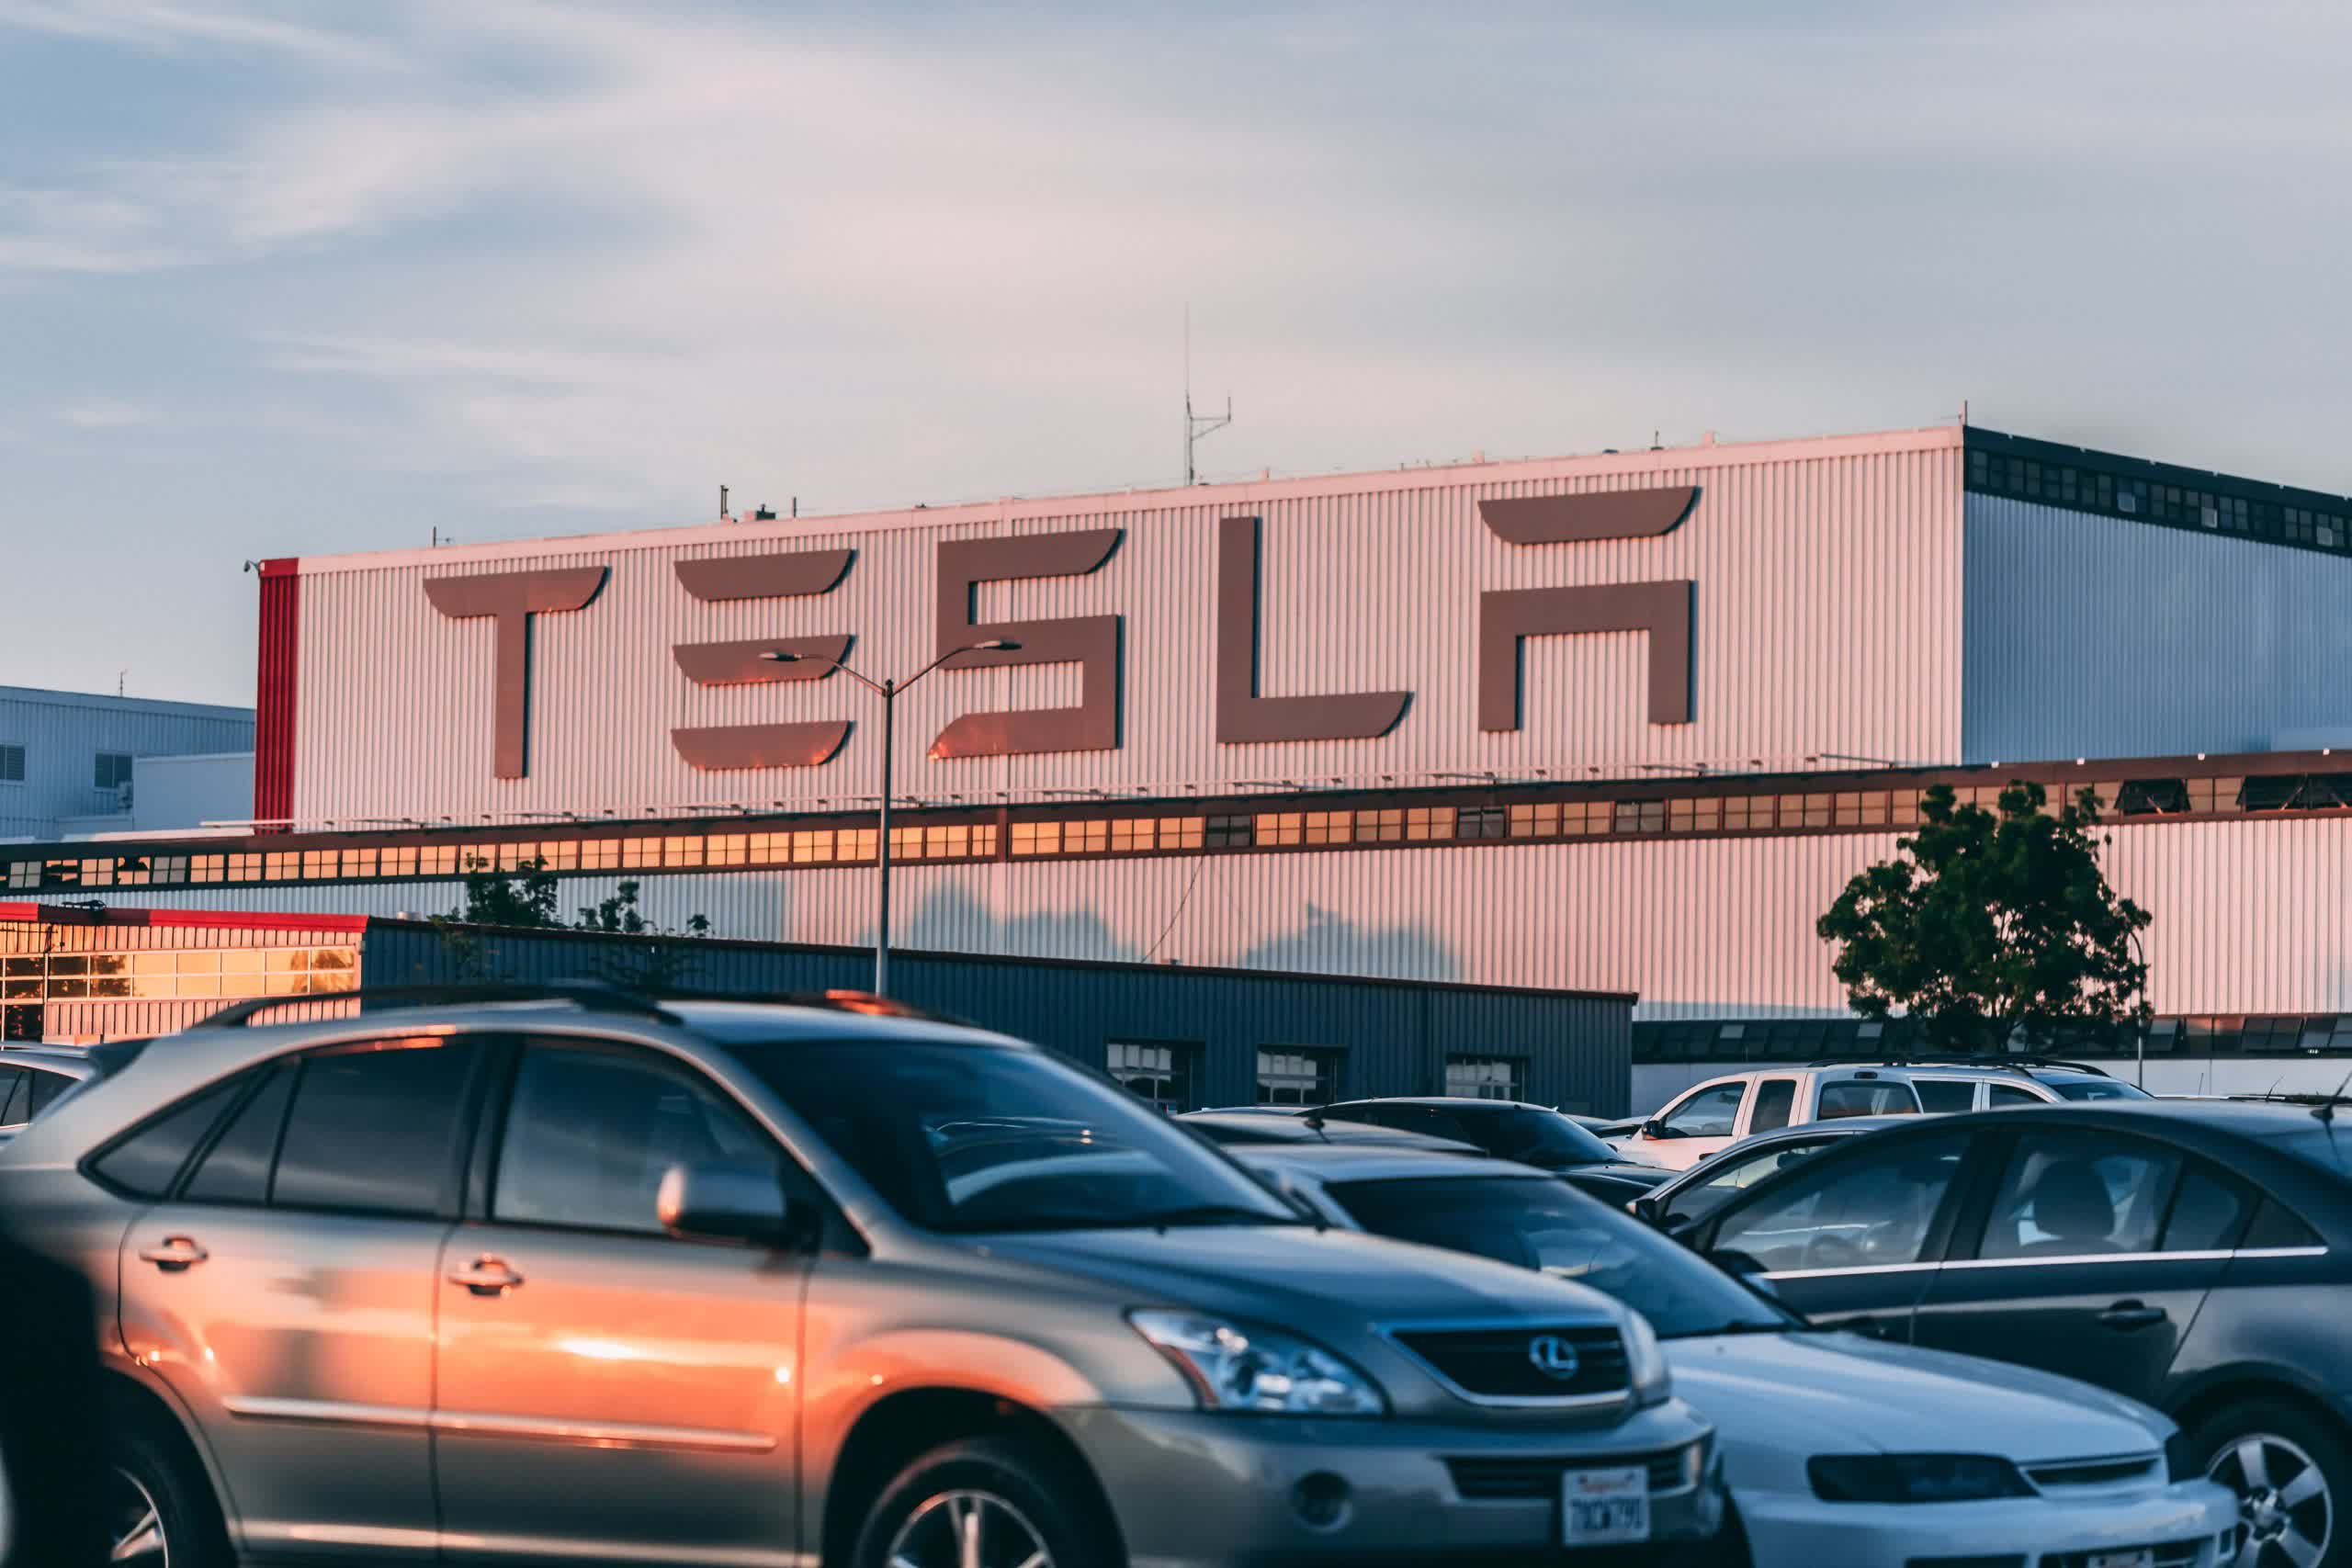 Tesla workers shared private and intimate videos captured by customer vehicles